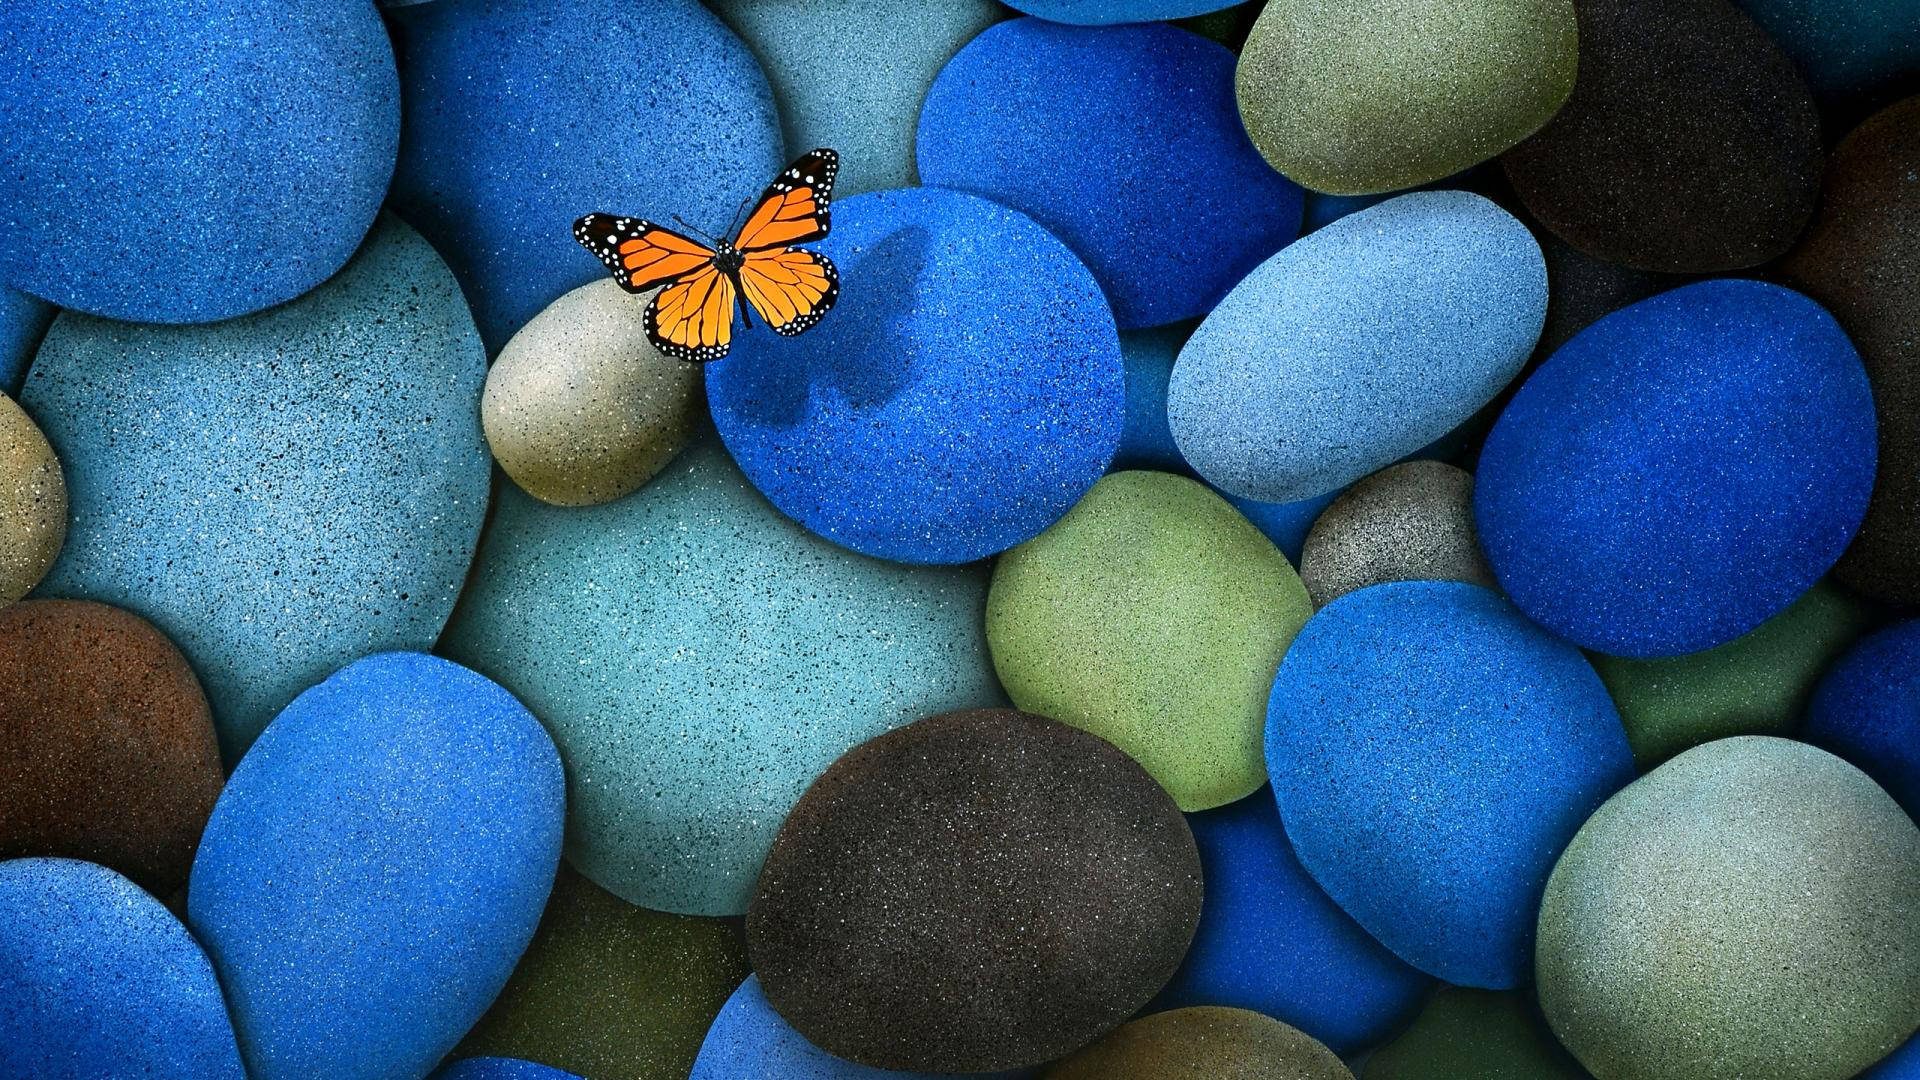 Beautiful Hd Butterfly And Colorful Stones